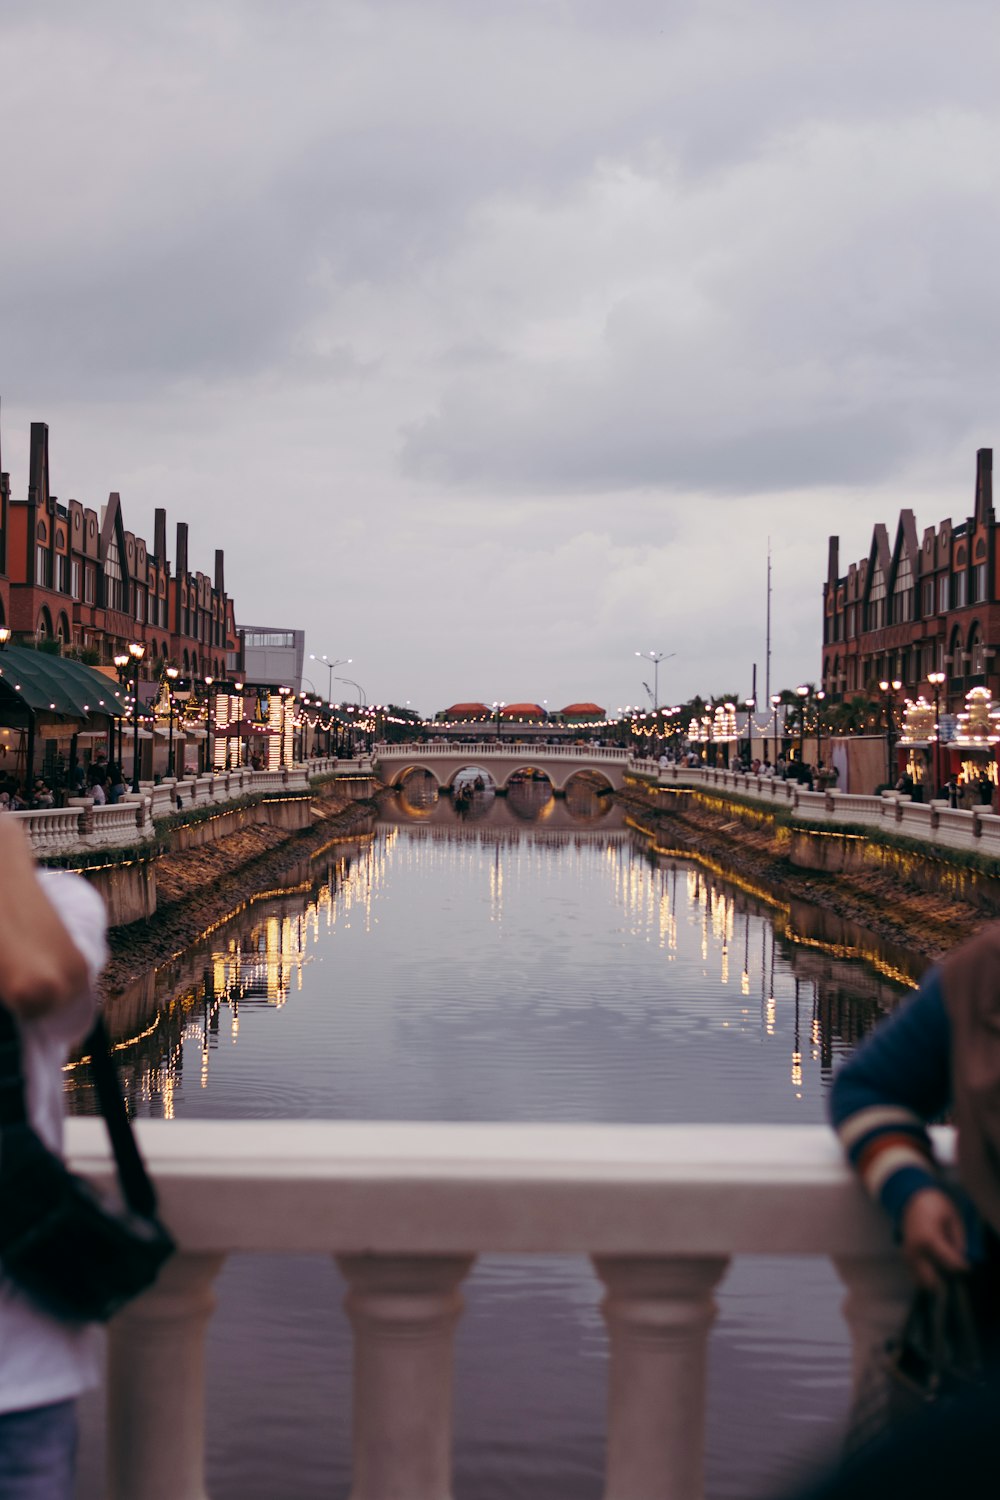 two people standing on a bridge looking at a canal